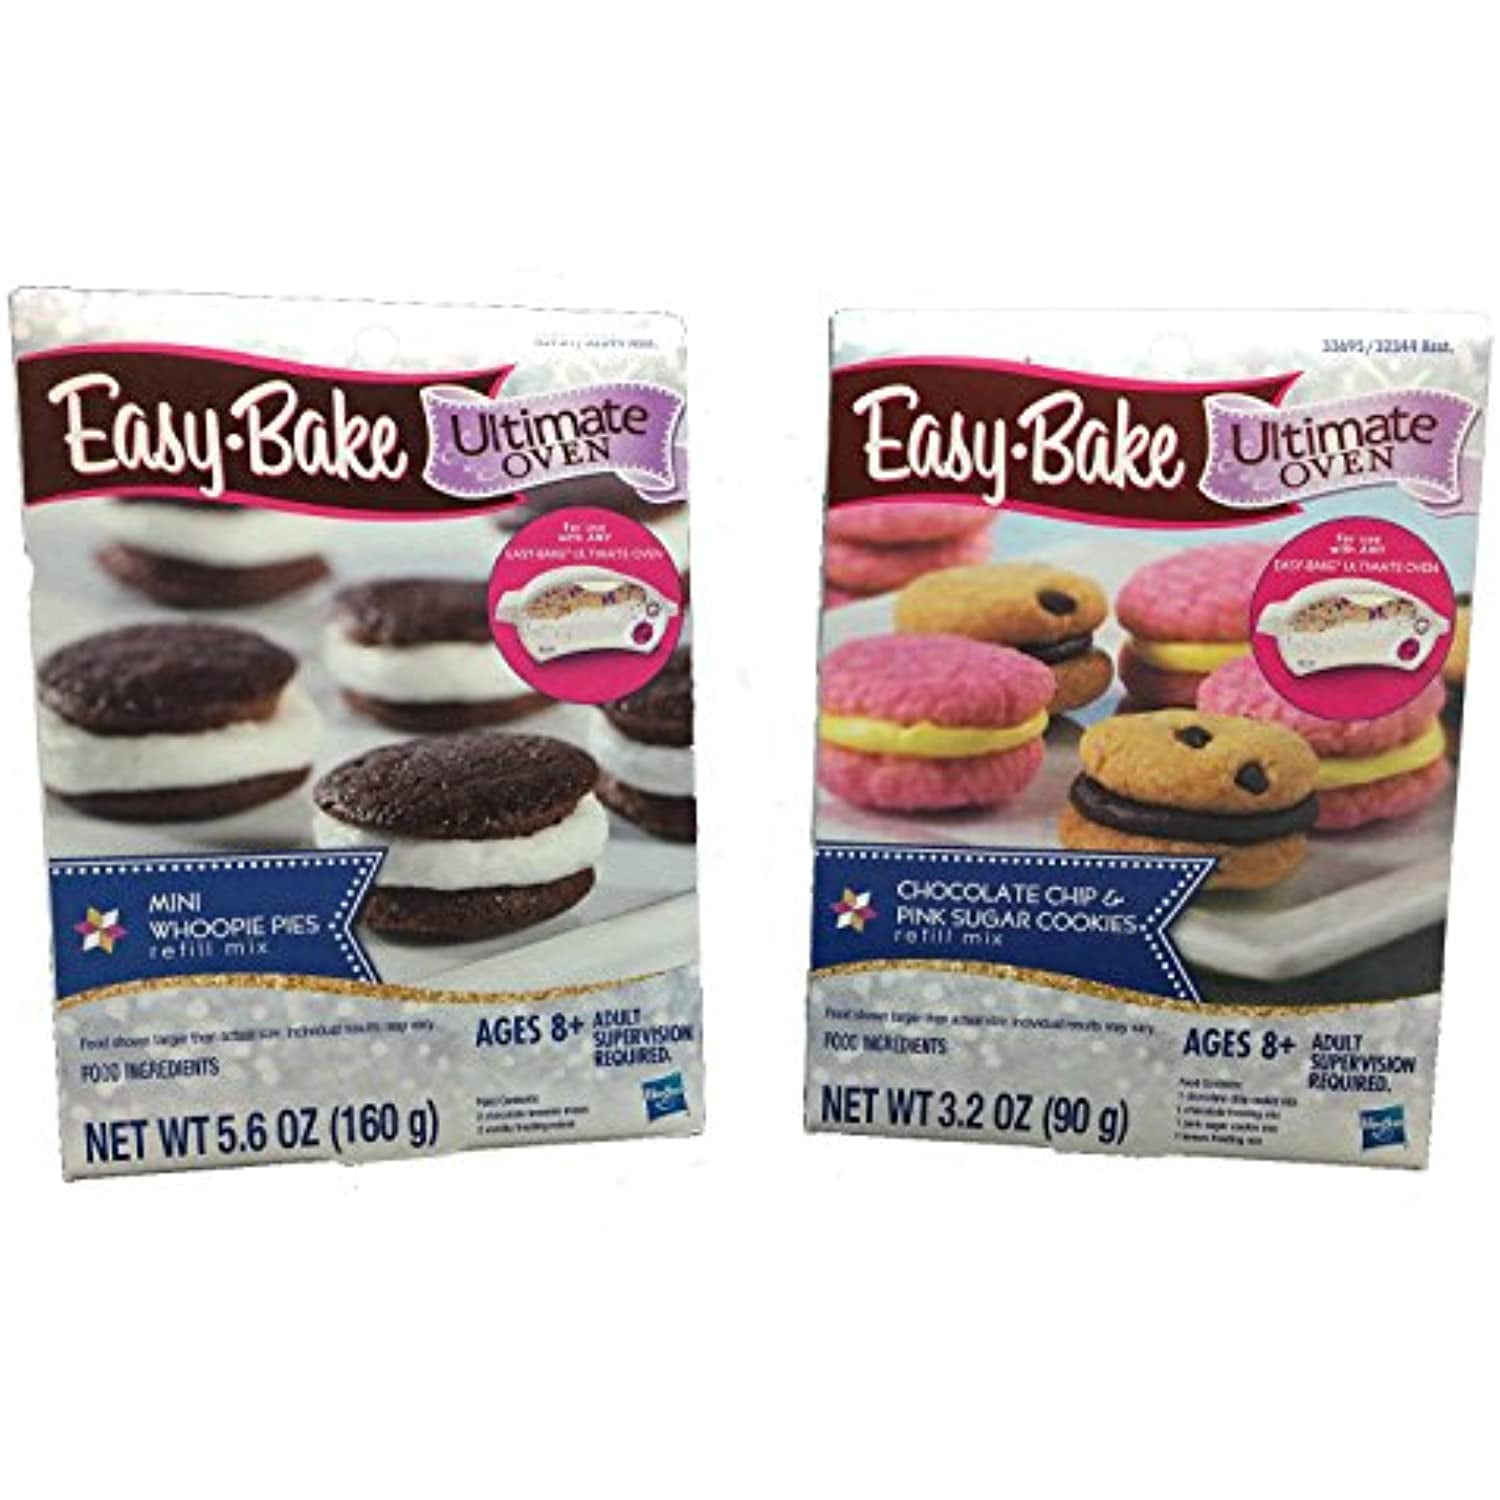 Details about   Easy-Bake Ultimate Oven Chocolate Chip & Pink Sugar Cookie Refill Mix New 